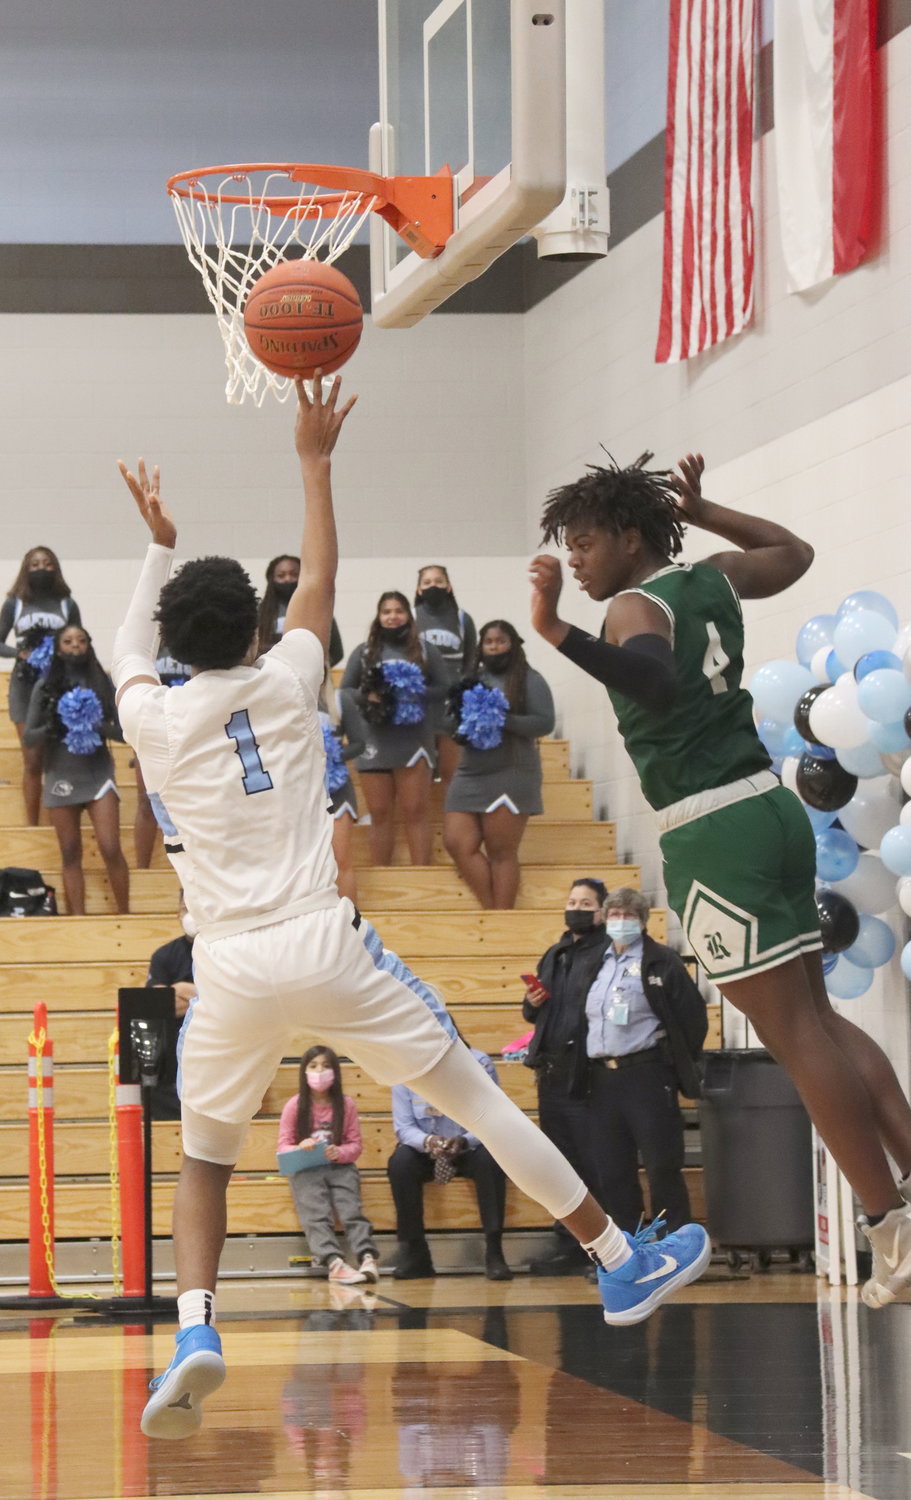 Paetow senior guard Brian McKnight scores a layup during the Panthers’ game against Bryan Rudder on Saturday, Feb. 6, at Paetow High.